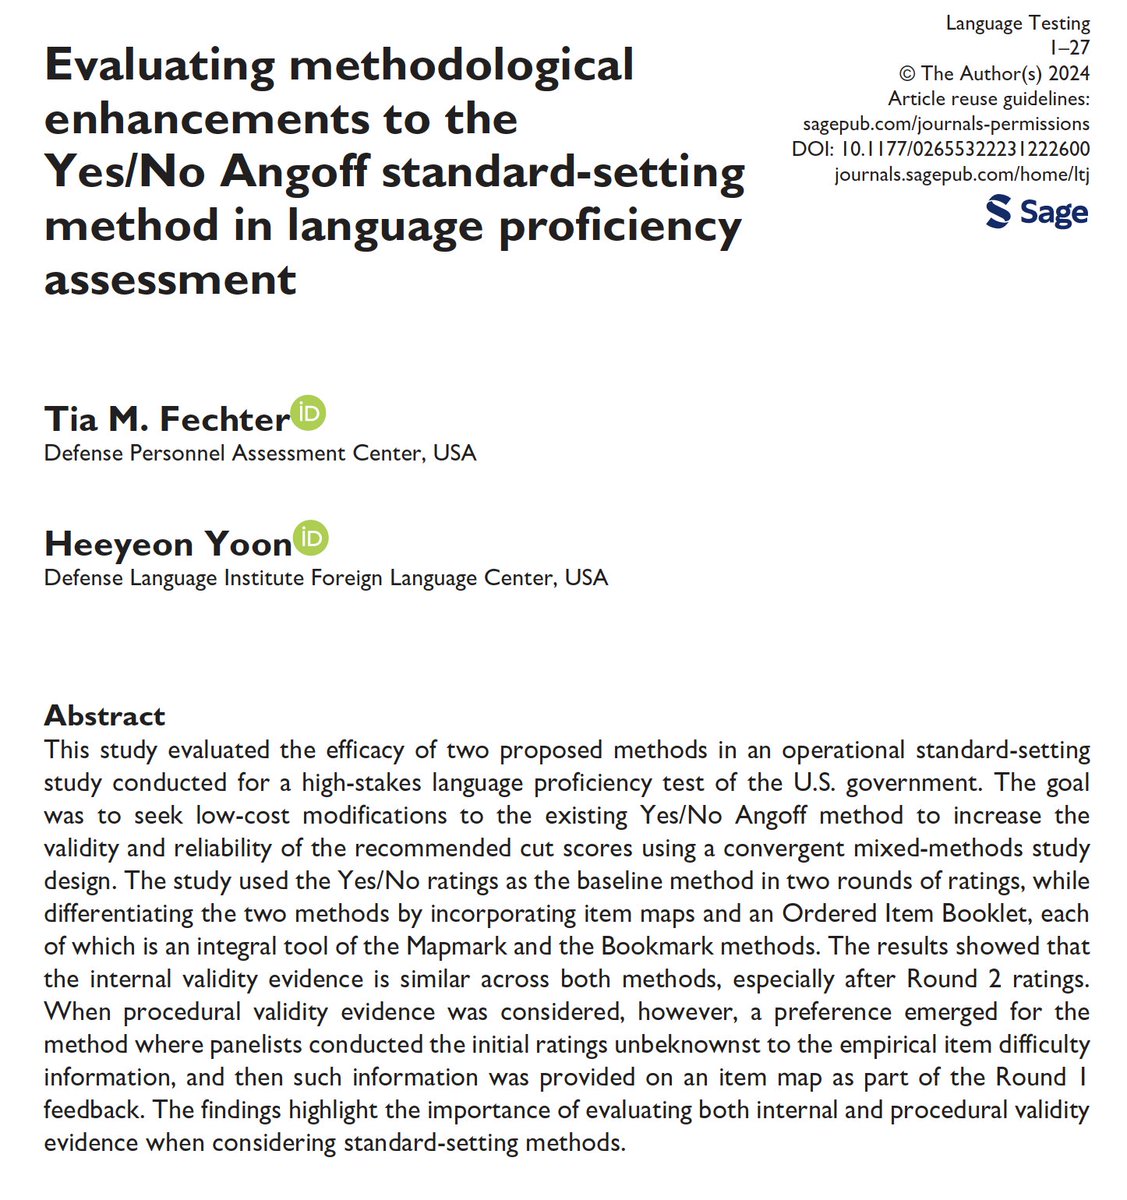 Now available in Online First, Tia M. Fechter and Heeyeon Yoon explore two methods for improving the validity and reliability of the recommended cut scores for language proficiency tests in the U.S. Government Defense Language Proficiency Test program. journals.sagepub.com/doi/full/10.11…